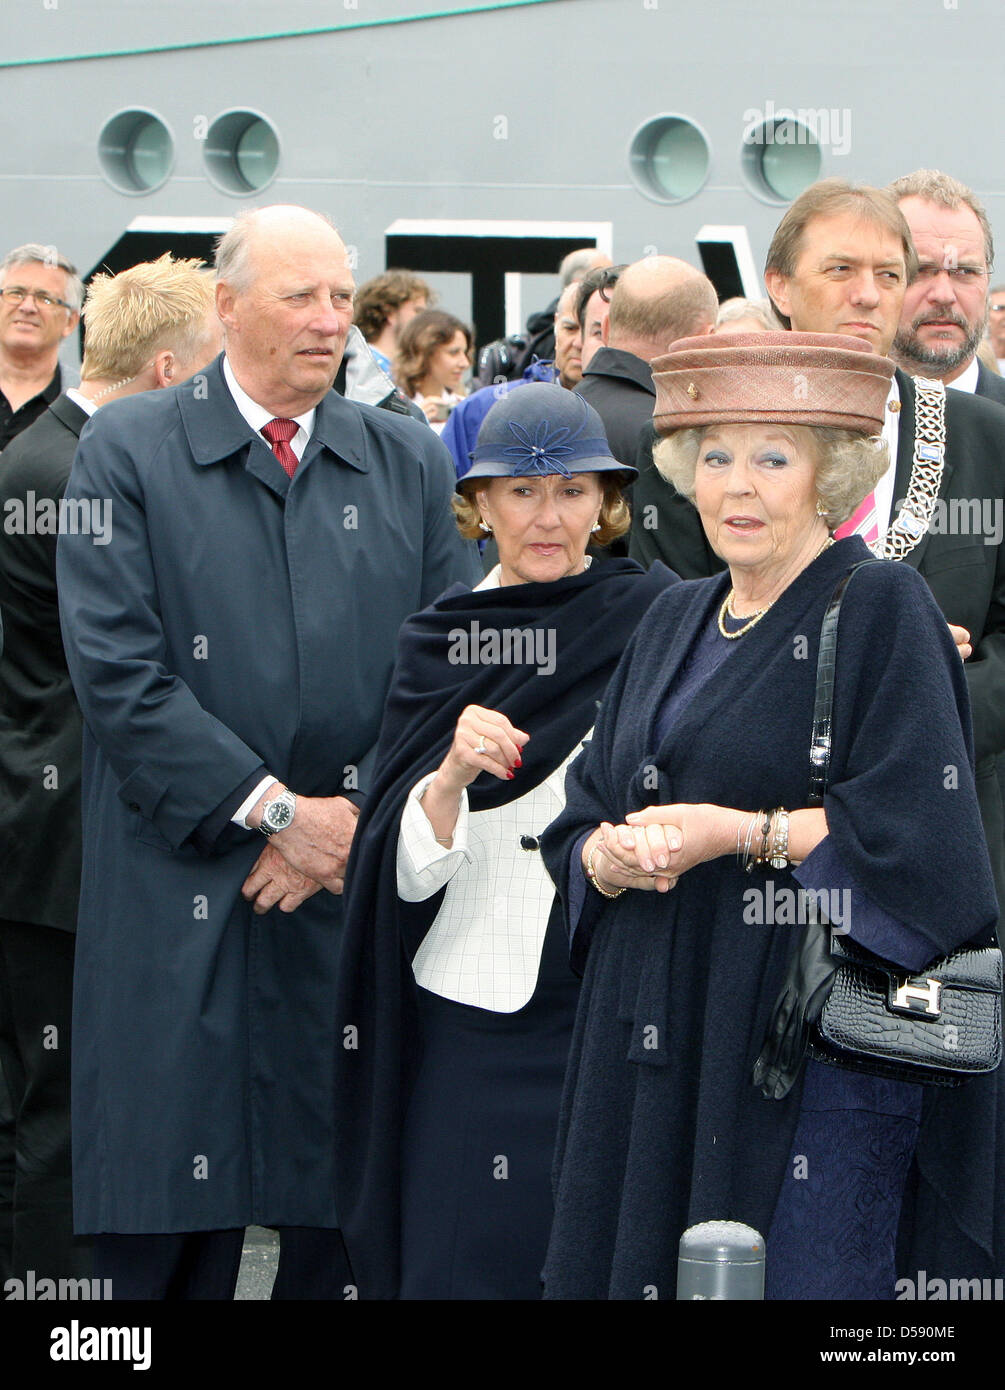 Queen Beatrix of the Netherlands (R) meets with Queen Sonja (C) and King Harald of Norway (L) in the city of Bergen, Norway, 03 June 2010. It is the last day of Dutch Queen Beatrix's three-day state visit to Norway. Photo: Albert Philip van der Werf (NETHERLANDS OUT) Stock Photo